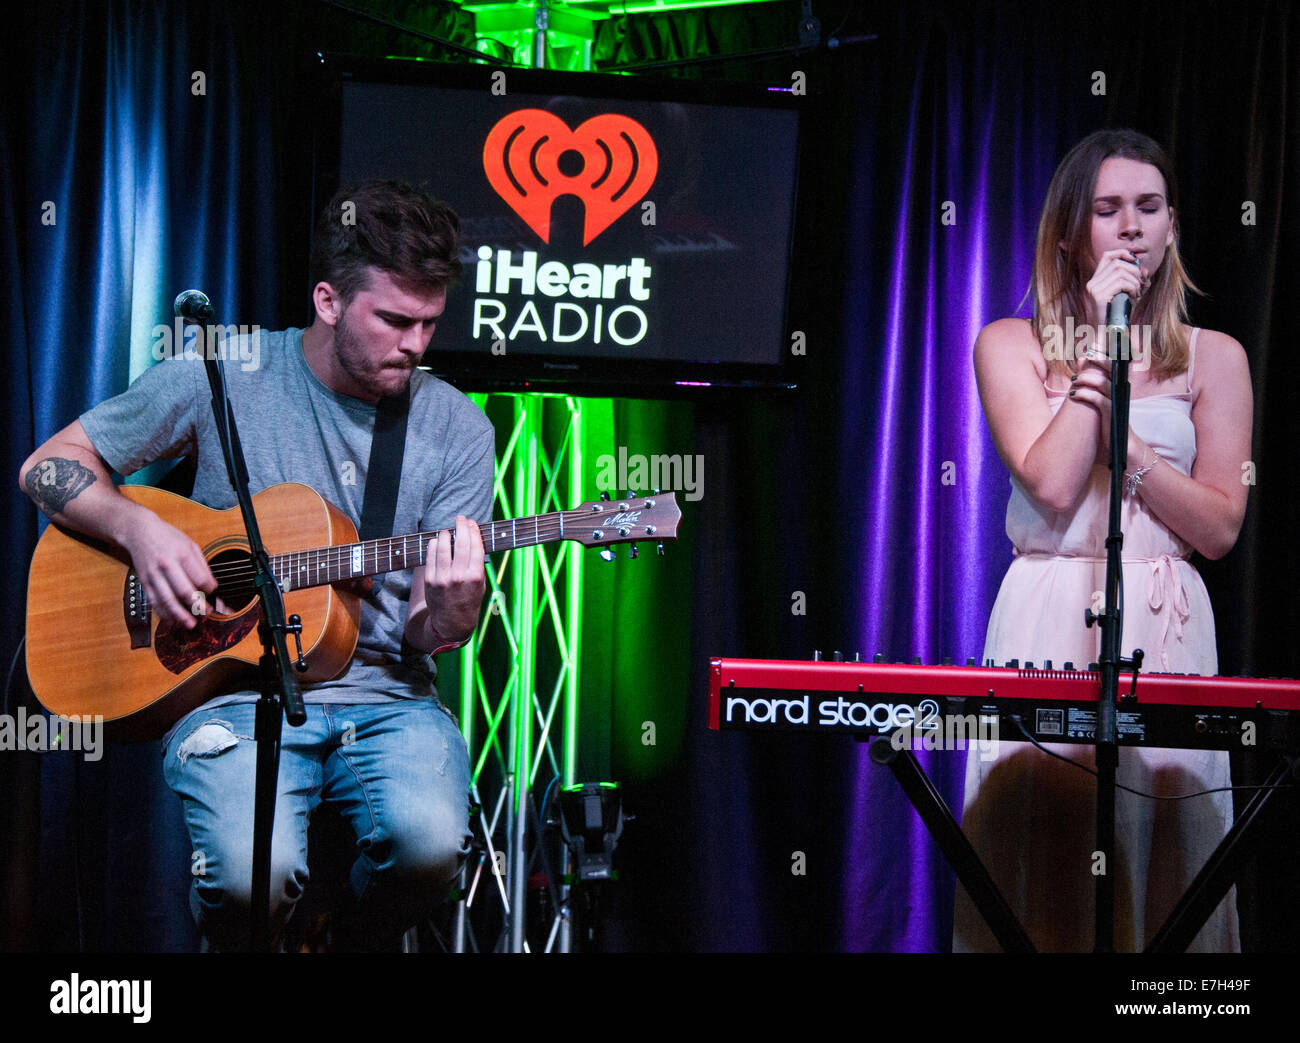 Bala Cynwyd, Pennsylvania, USA. 17th September, 2014. (L to R) Caleb Nott and Georgia Nott of New Zealand Indie Pop Duo Broods Perform at Radio 104.5's Performance Theatre on September 17, 2014 in Bala Cynwyd, Pennsylvania, United States. Credit:  Paul Froggatt/Alamy Live News Stock Photo